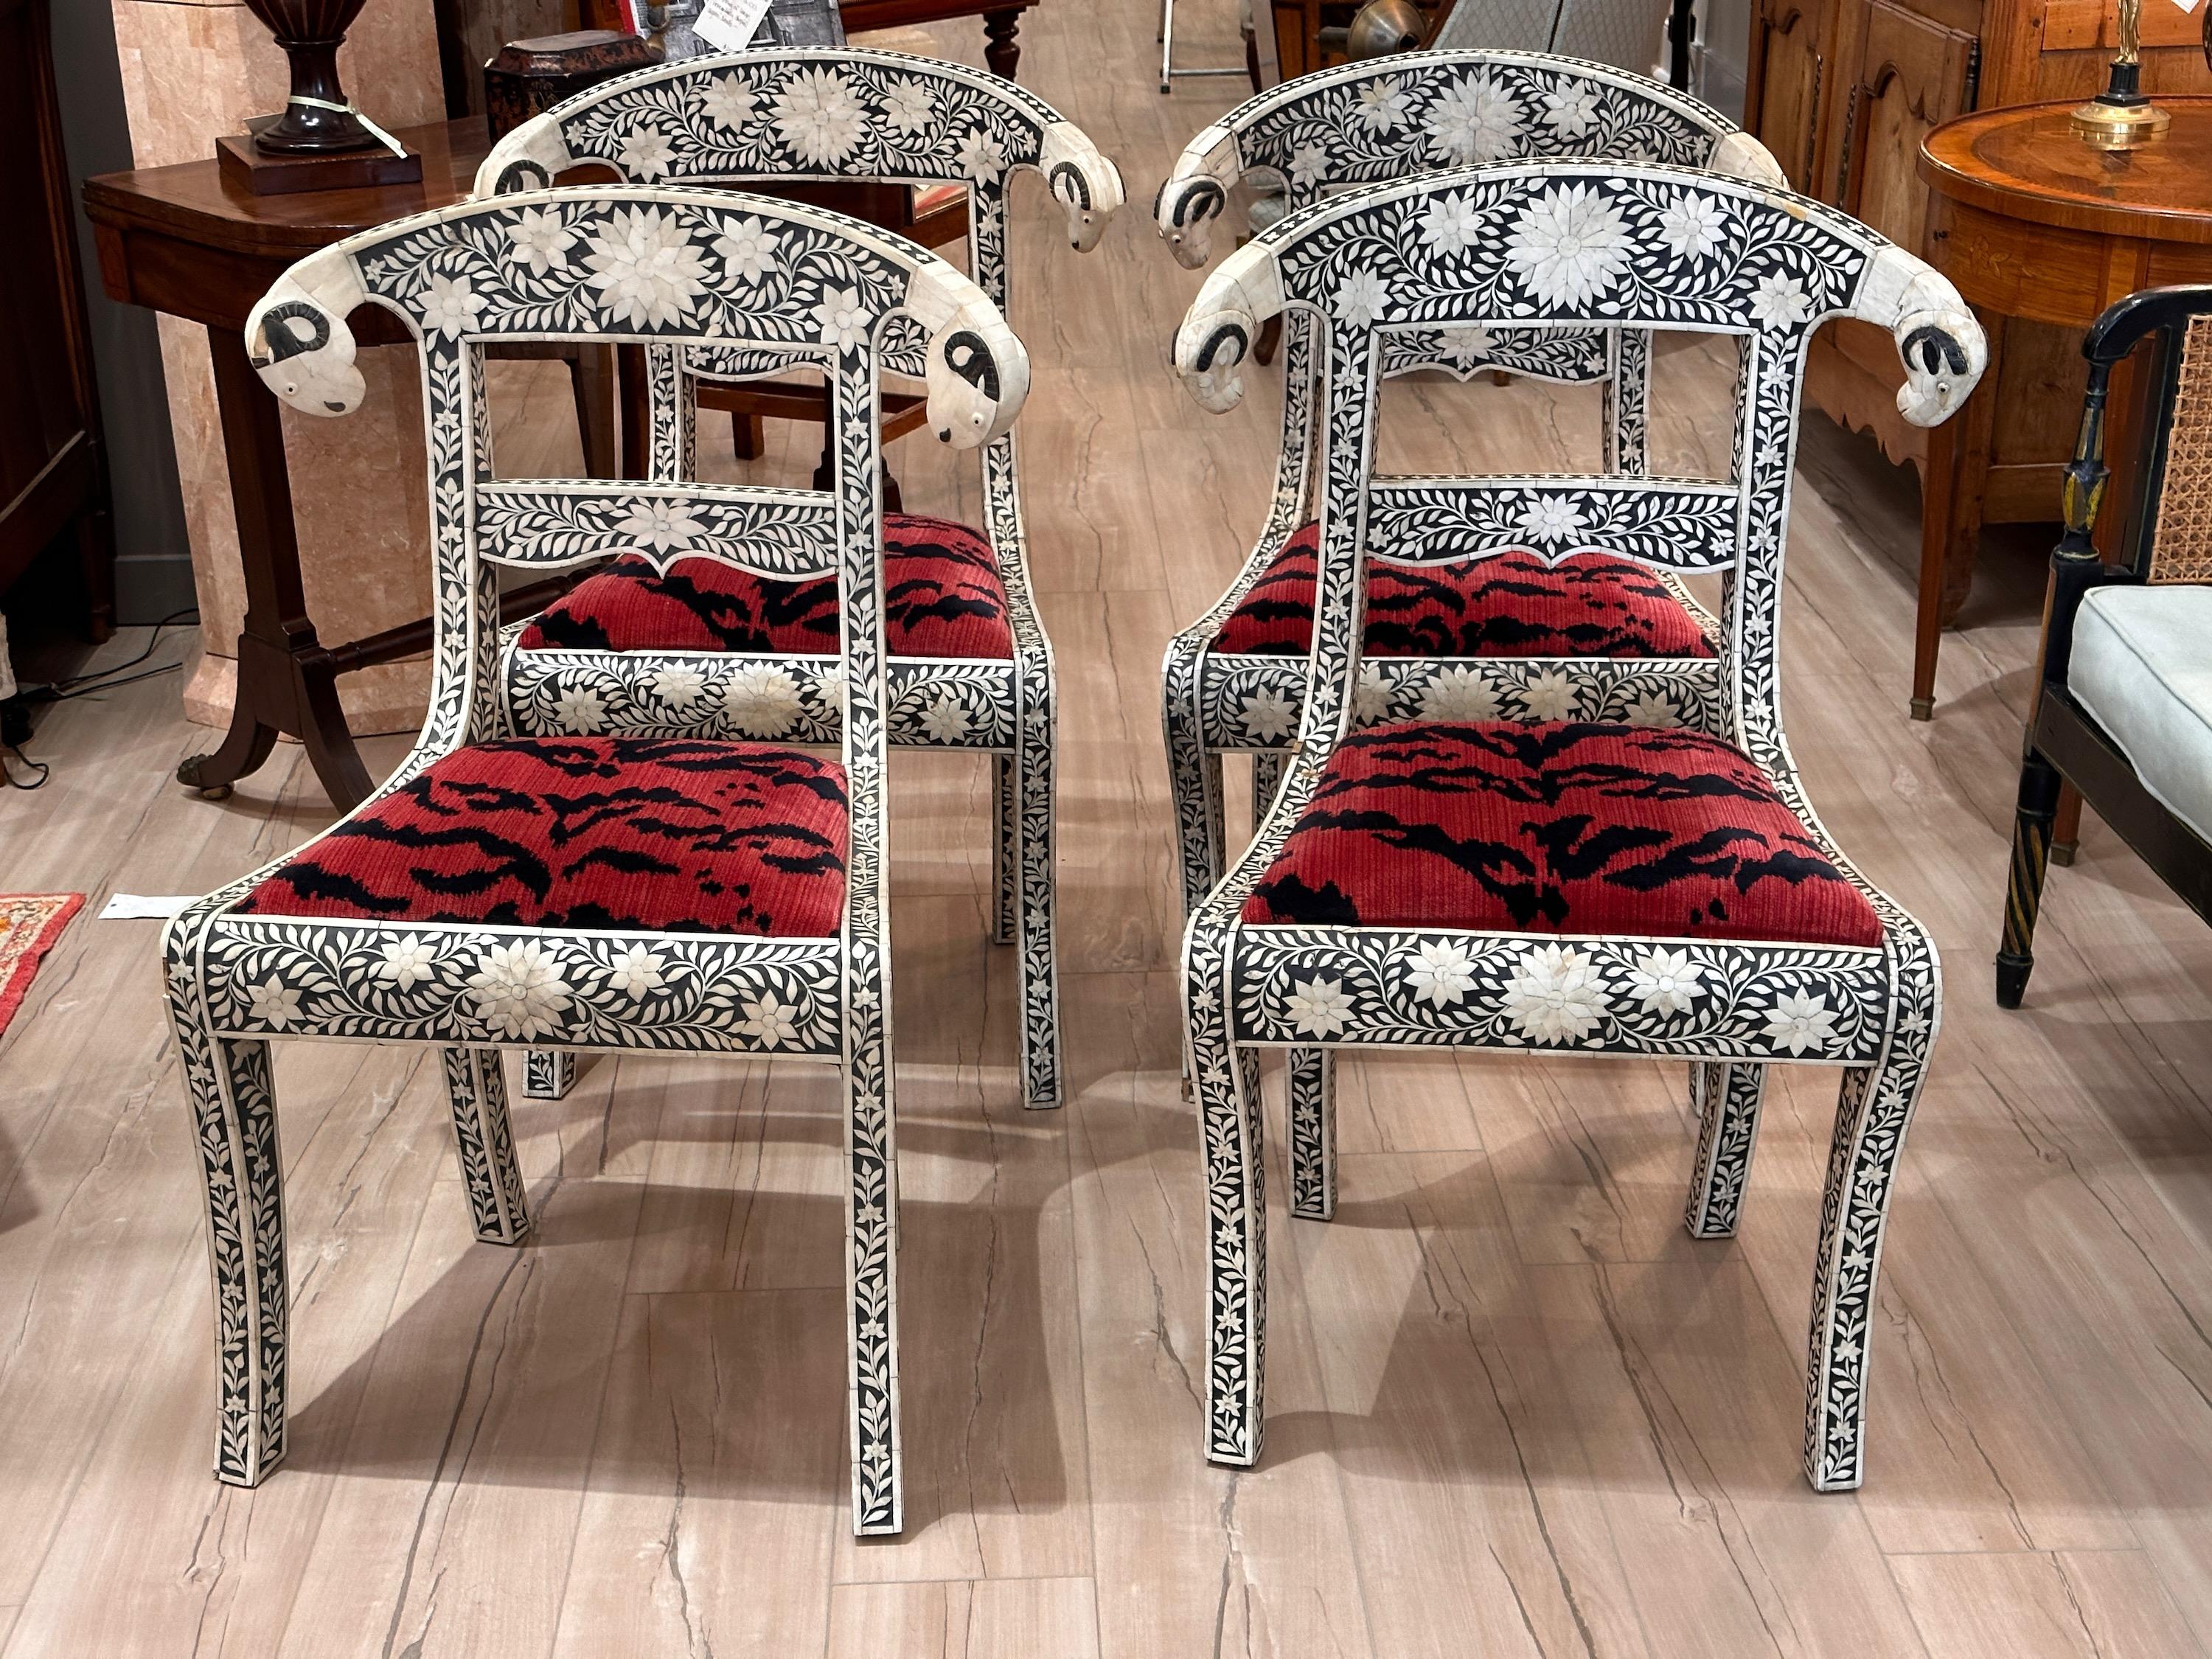 An set of four Regency style side chairs extensively inlaid with bone and ebony and carved ram's head accents upholstered in a red and black tiger stripe velvet.